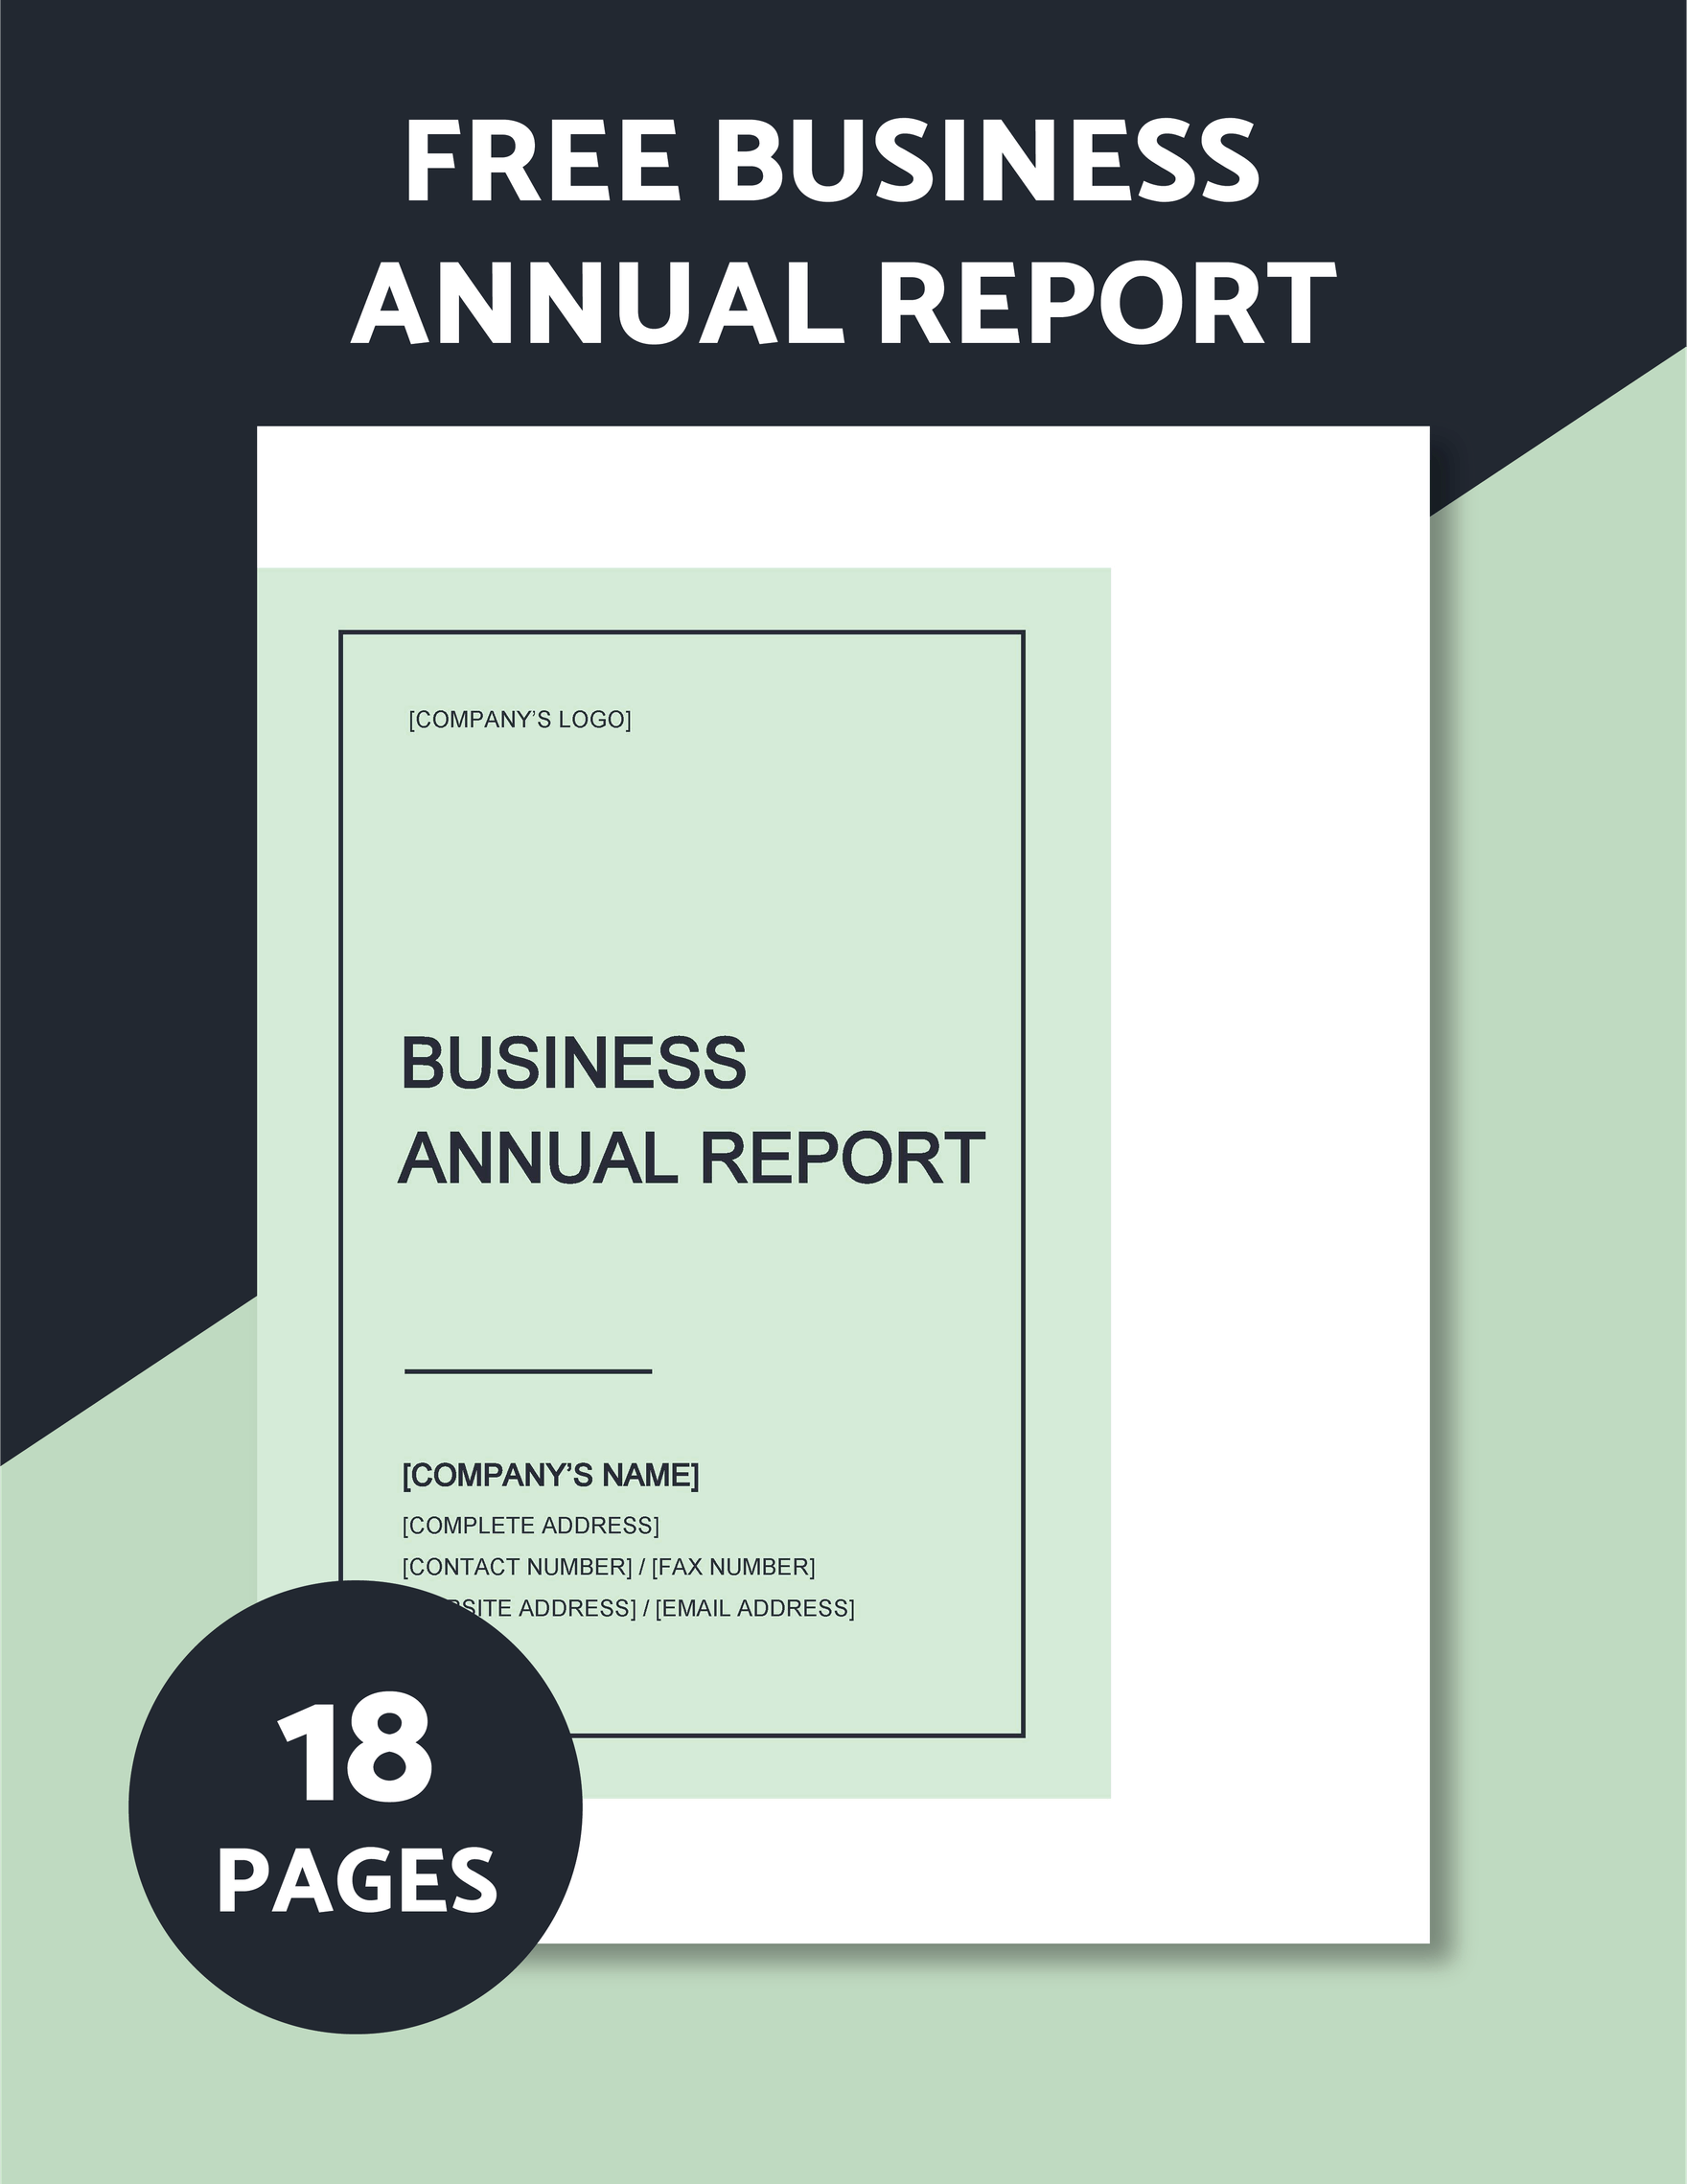 Free Business Annual Report Template in Word, Google Docs, Apple Pages